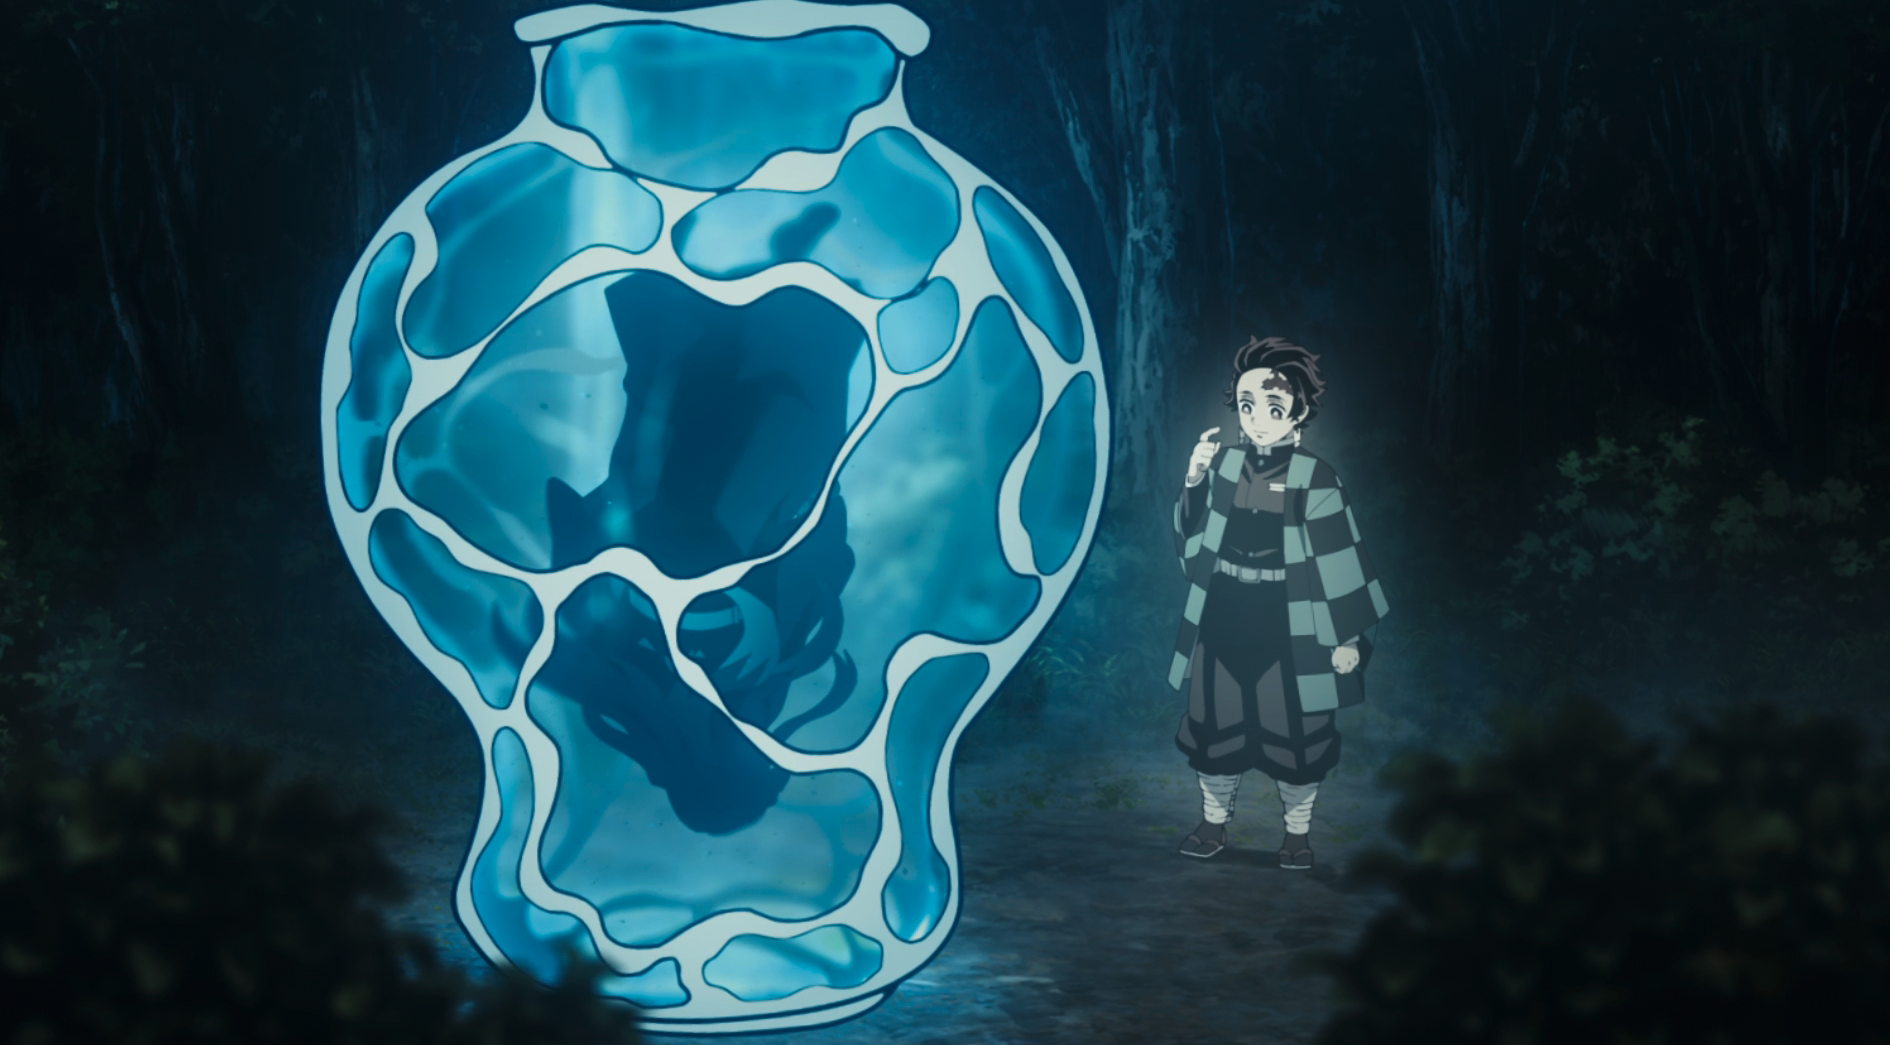 Demon Slayer Season 3 to conclude with a jaw-dropping 70-minute